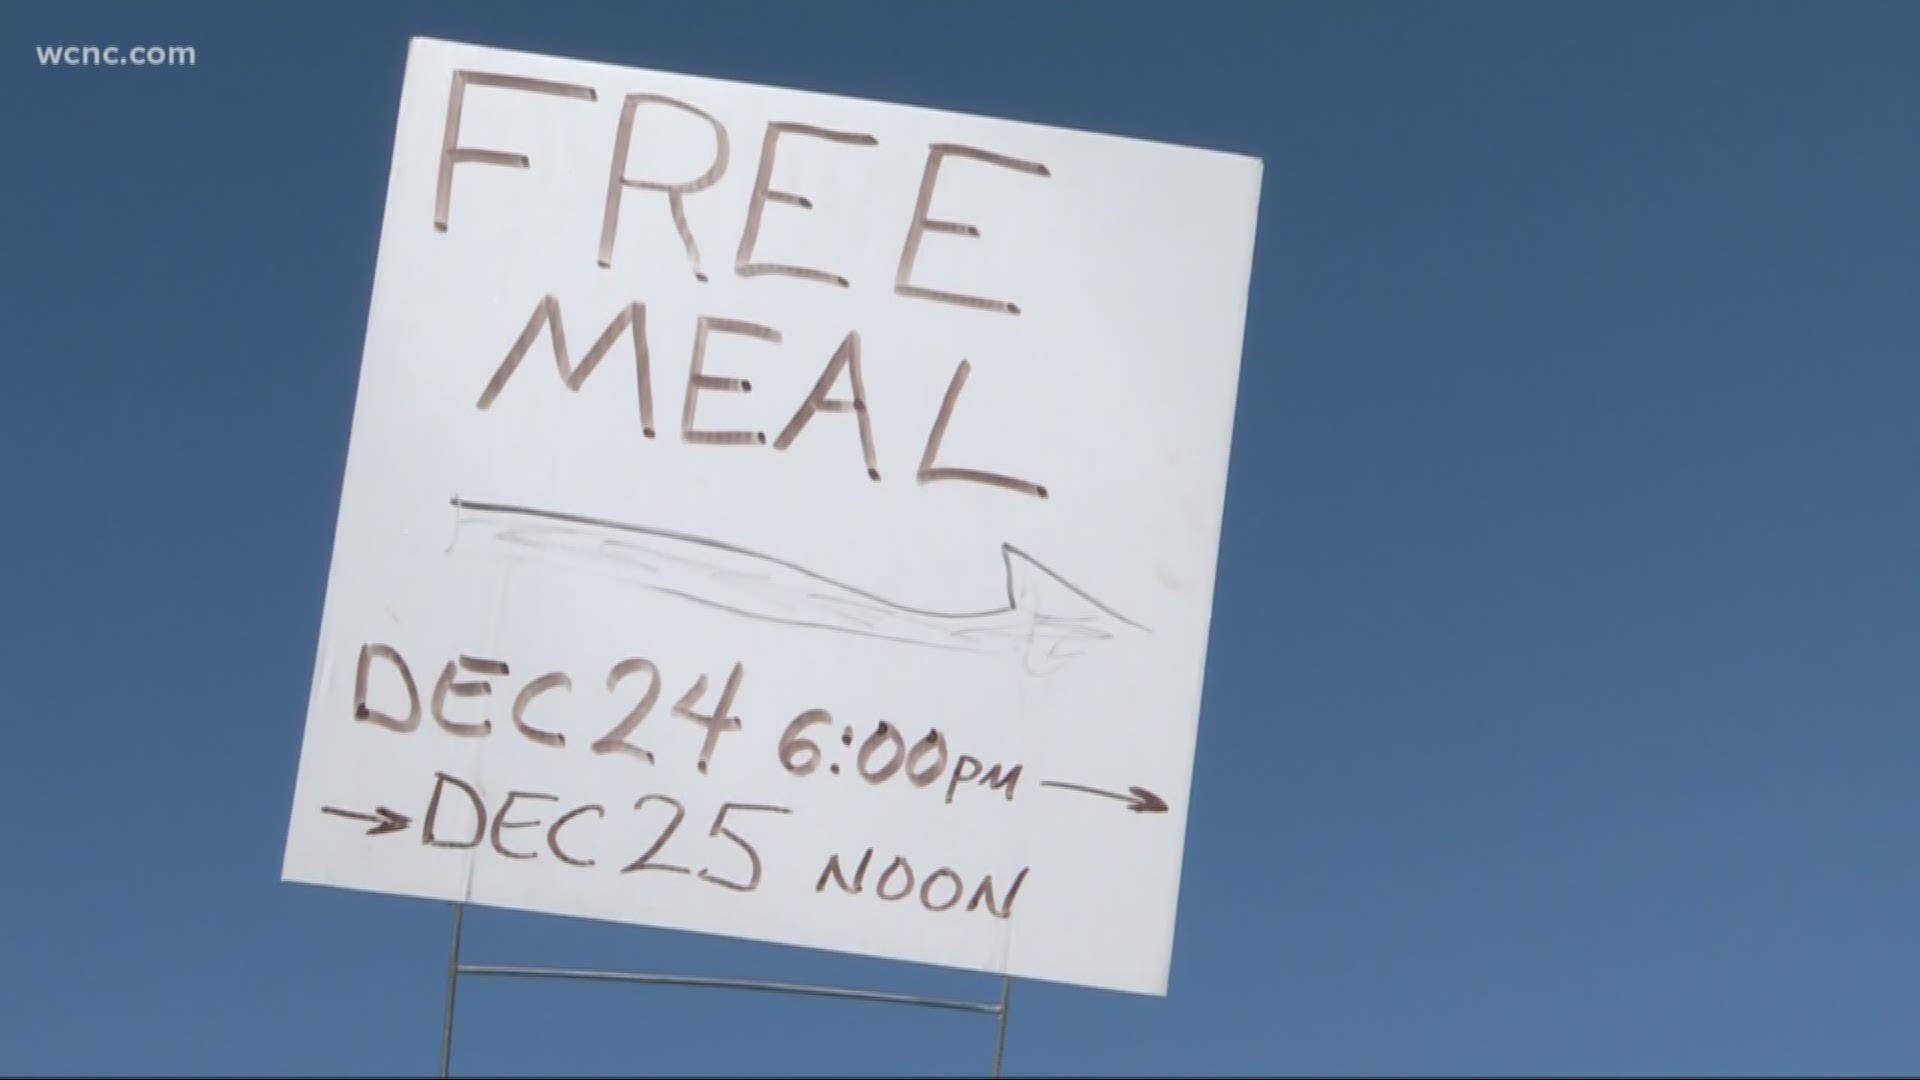 East Baptist Church in Gastonia will be serving meals from 6 p.m. Christmas Eve to noon Christmas Day for its annual Christmas Feast.